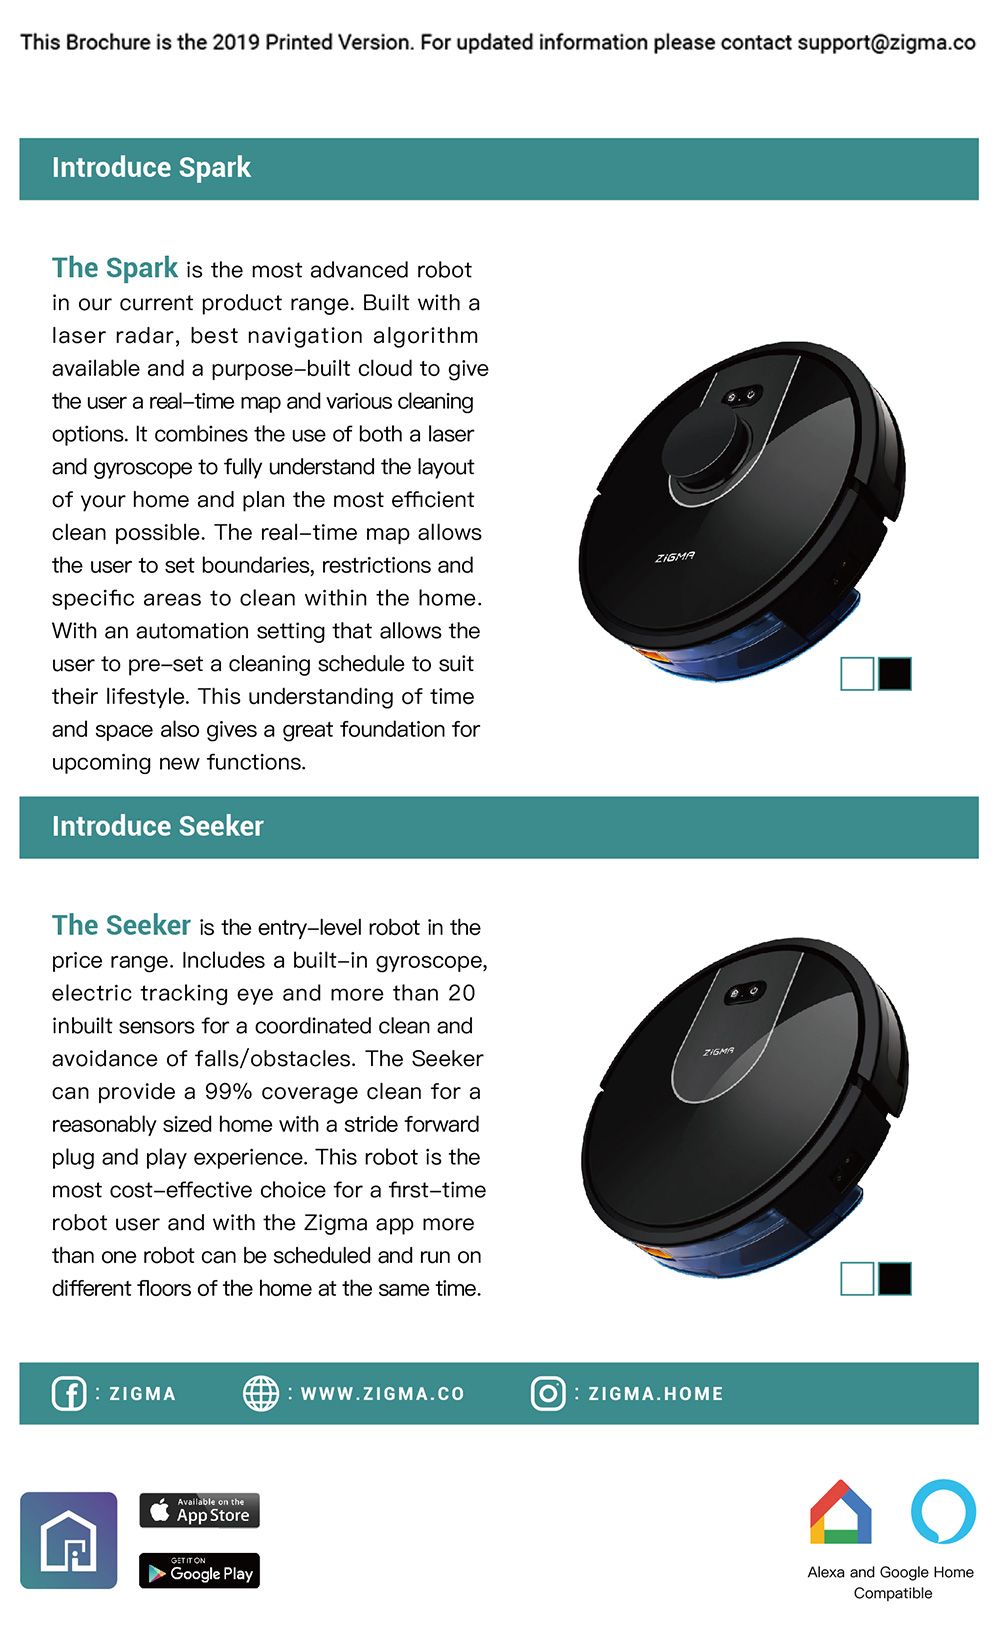 Zigma Spark Robot Vacuum Cleaner Virtual Wall Automatic Area Cleaning 1500pa Suction LDS Navigation APP Control - Black